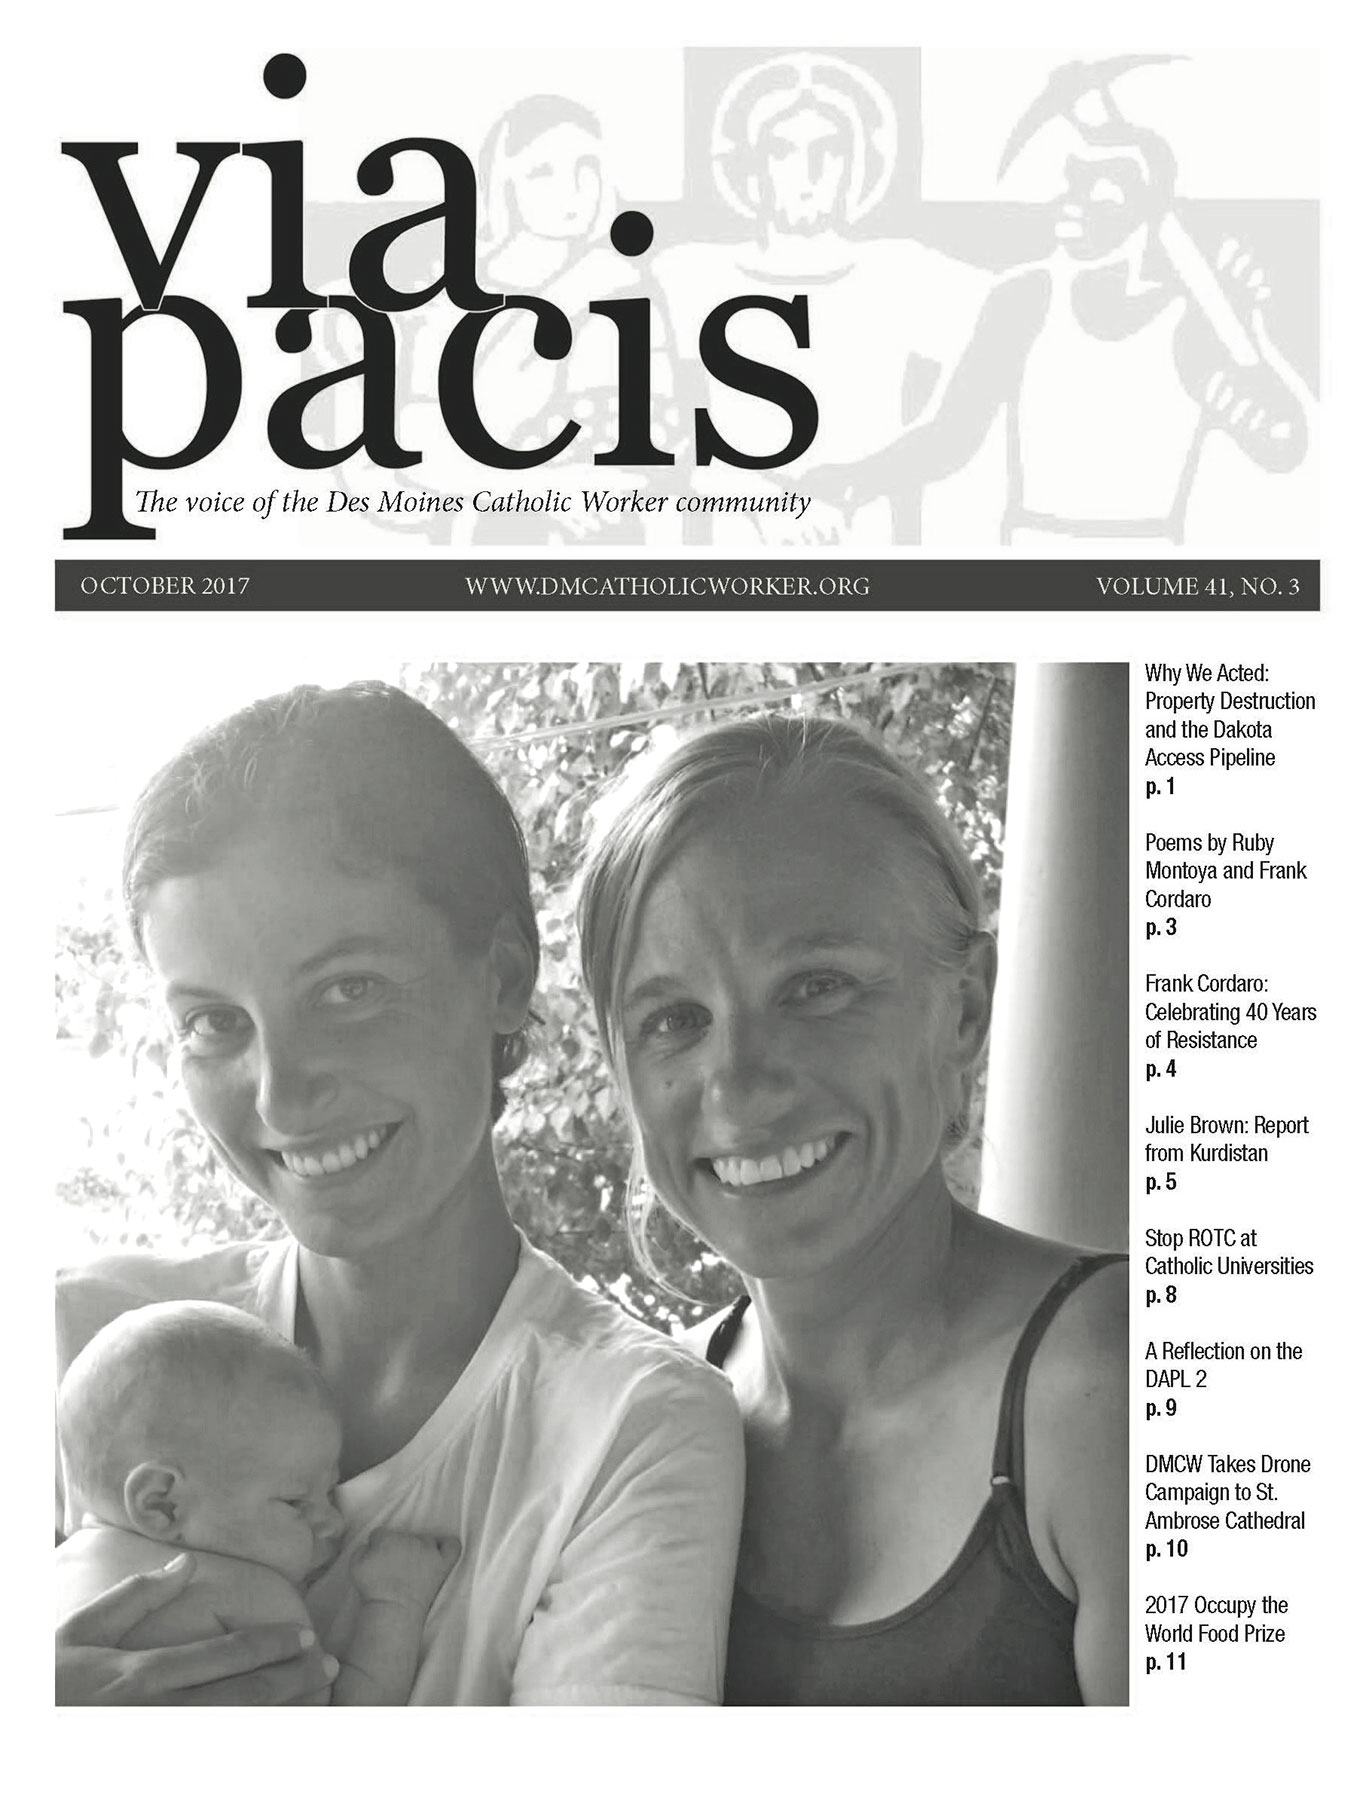 A black and white scan of the Via Pacis magazine with a photo of Jessica Reznicek (right) and Ruby Montoya (left) holding a baby